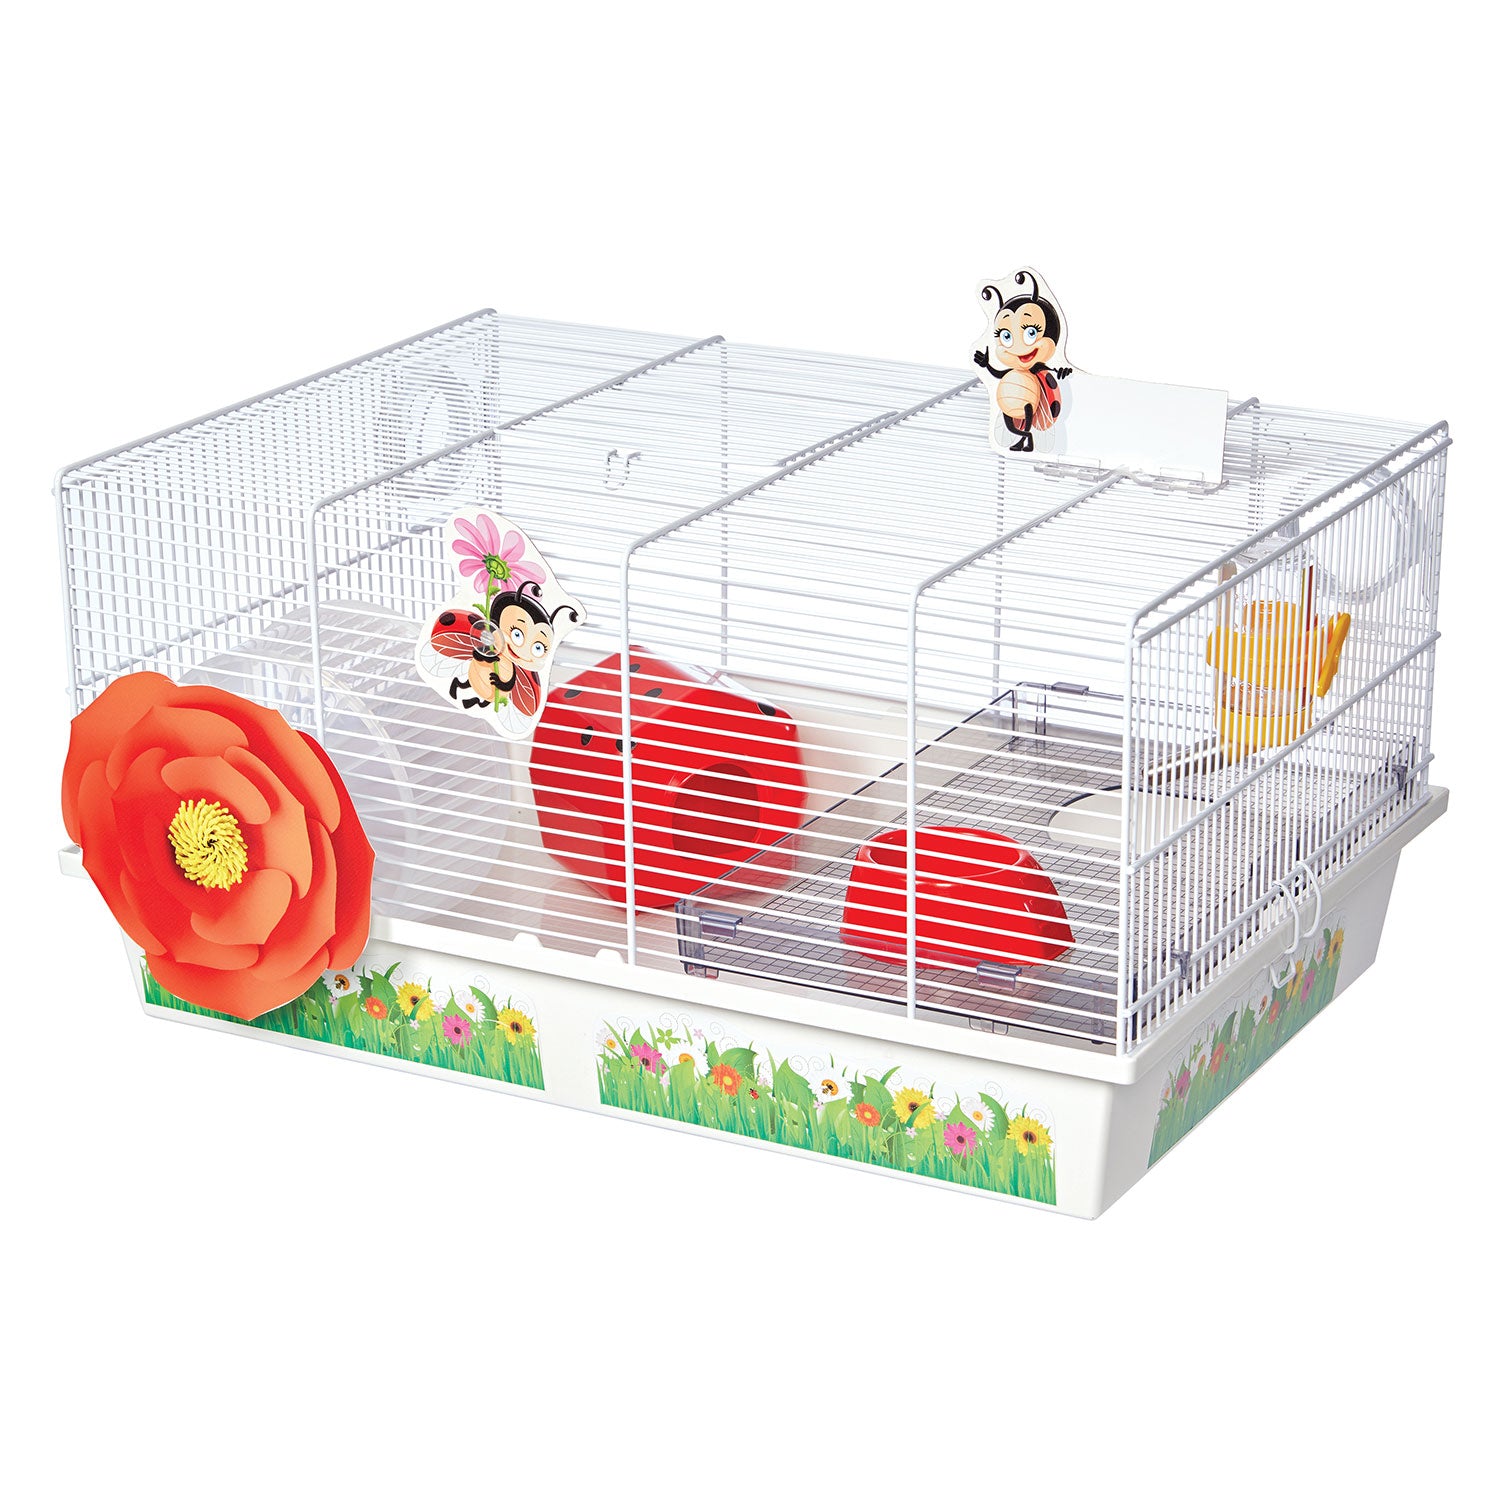 Midwest Critterville Ladybug Hamster Home